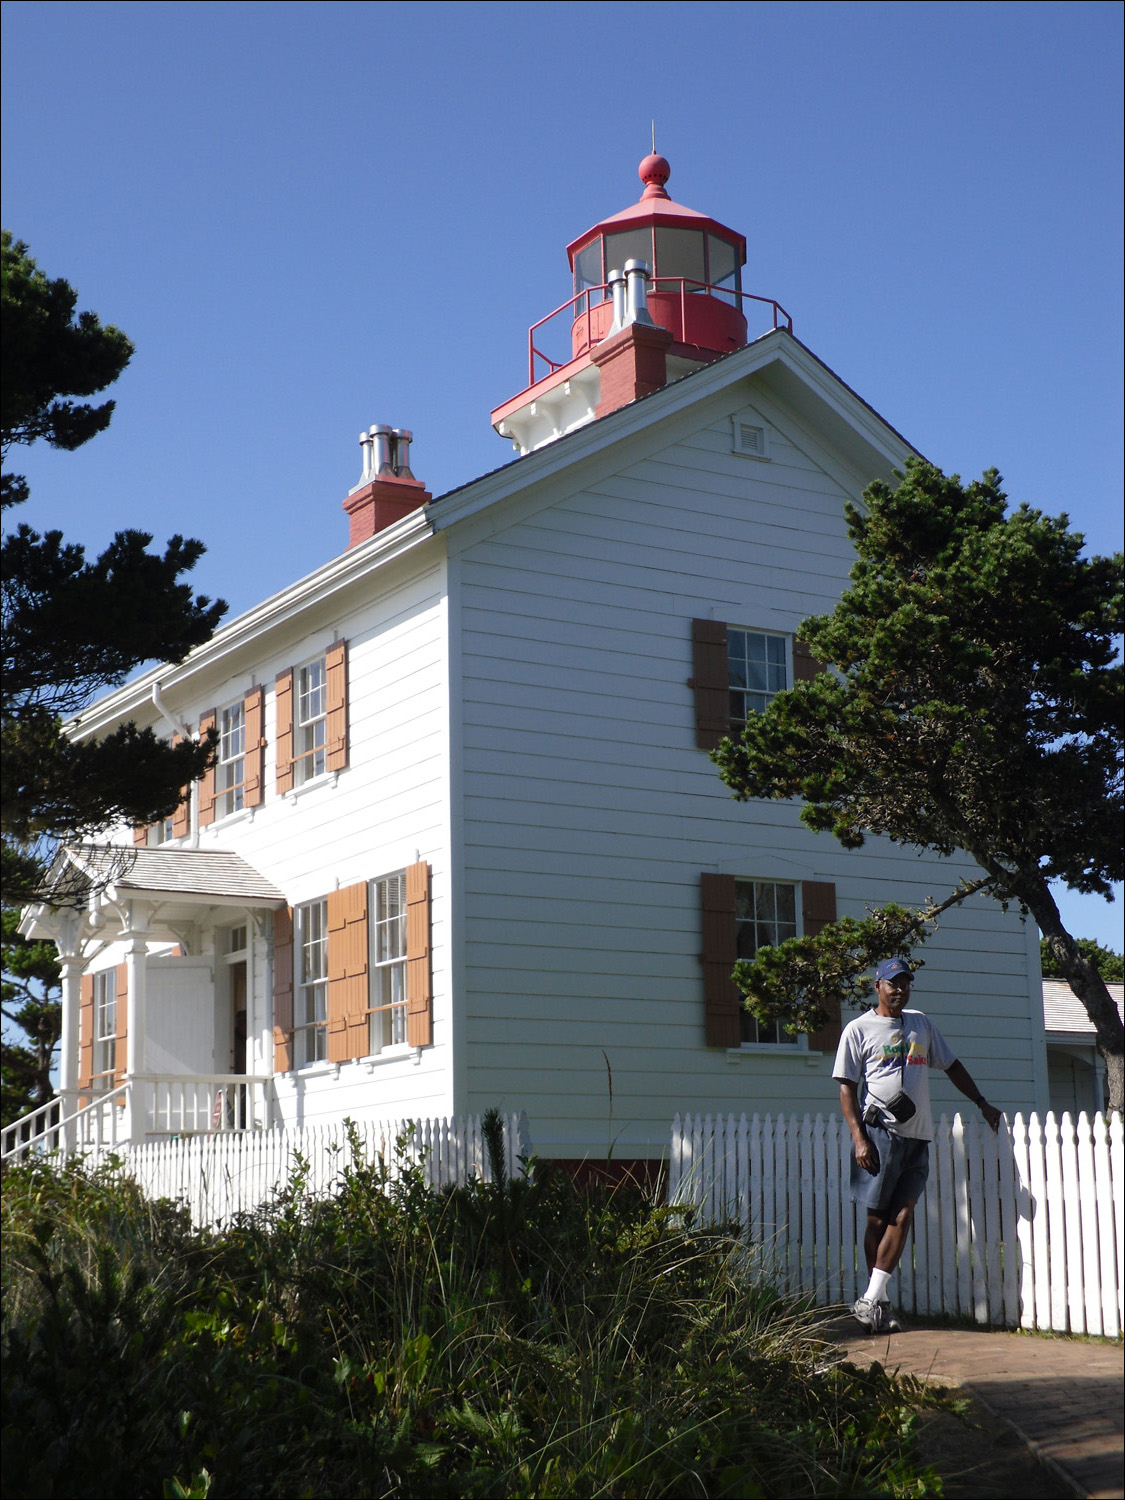 Newport, OR- Yaquina Bay Lighthouse-operated 1871 to 1874, replaced by Yaquina Head Lighthouse